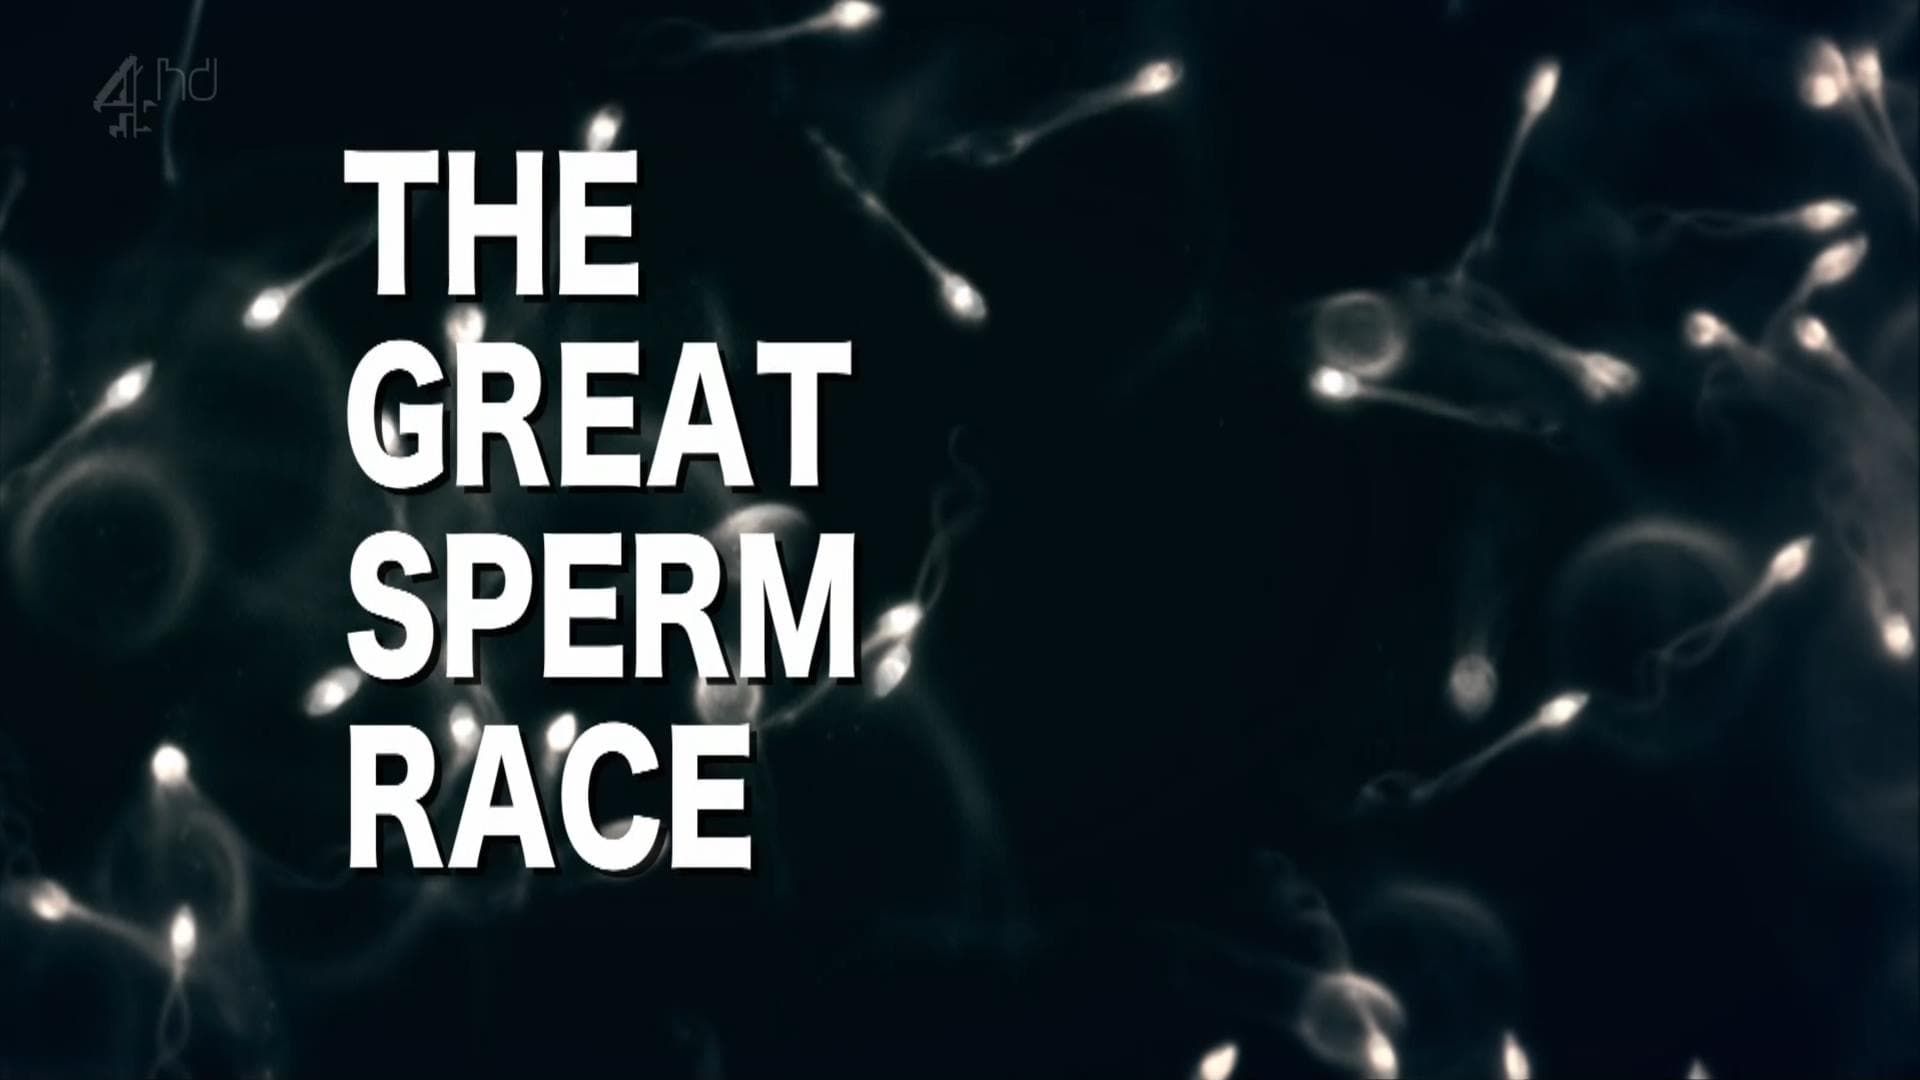 The Great Sperm Race background